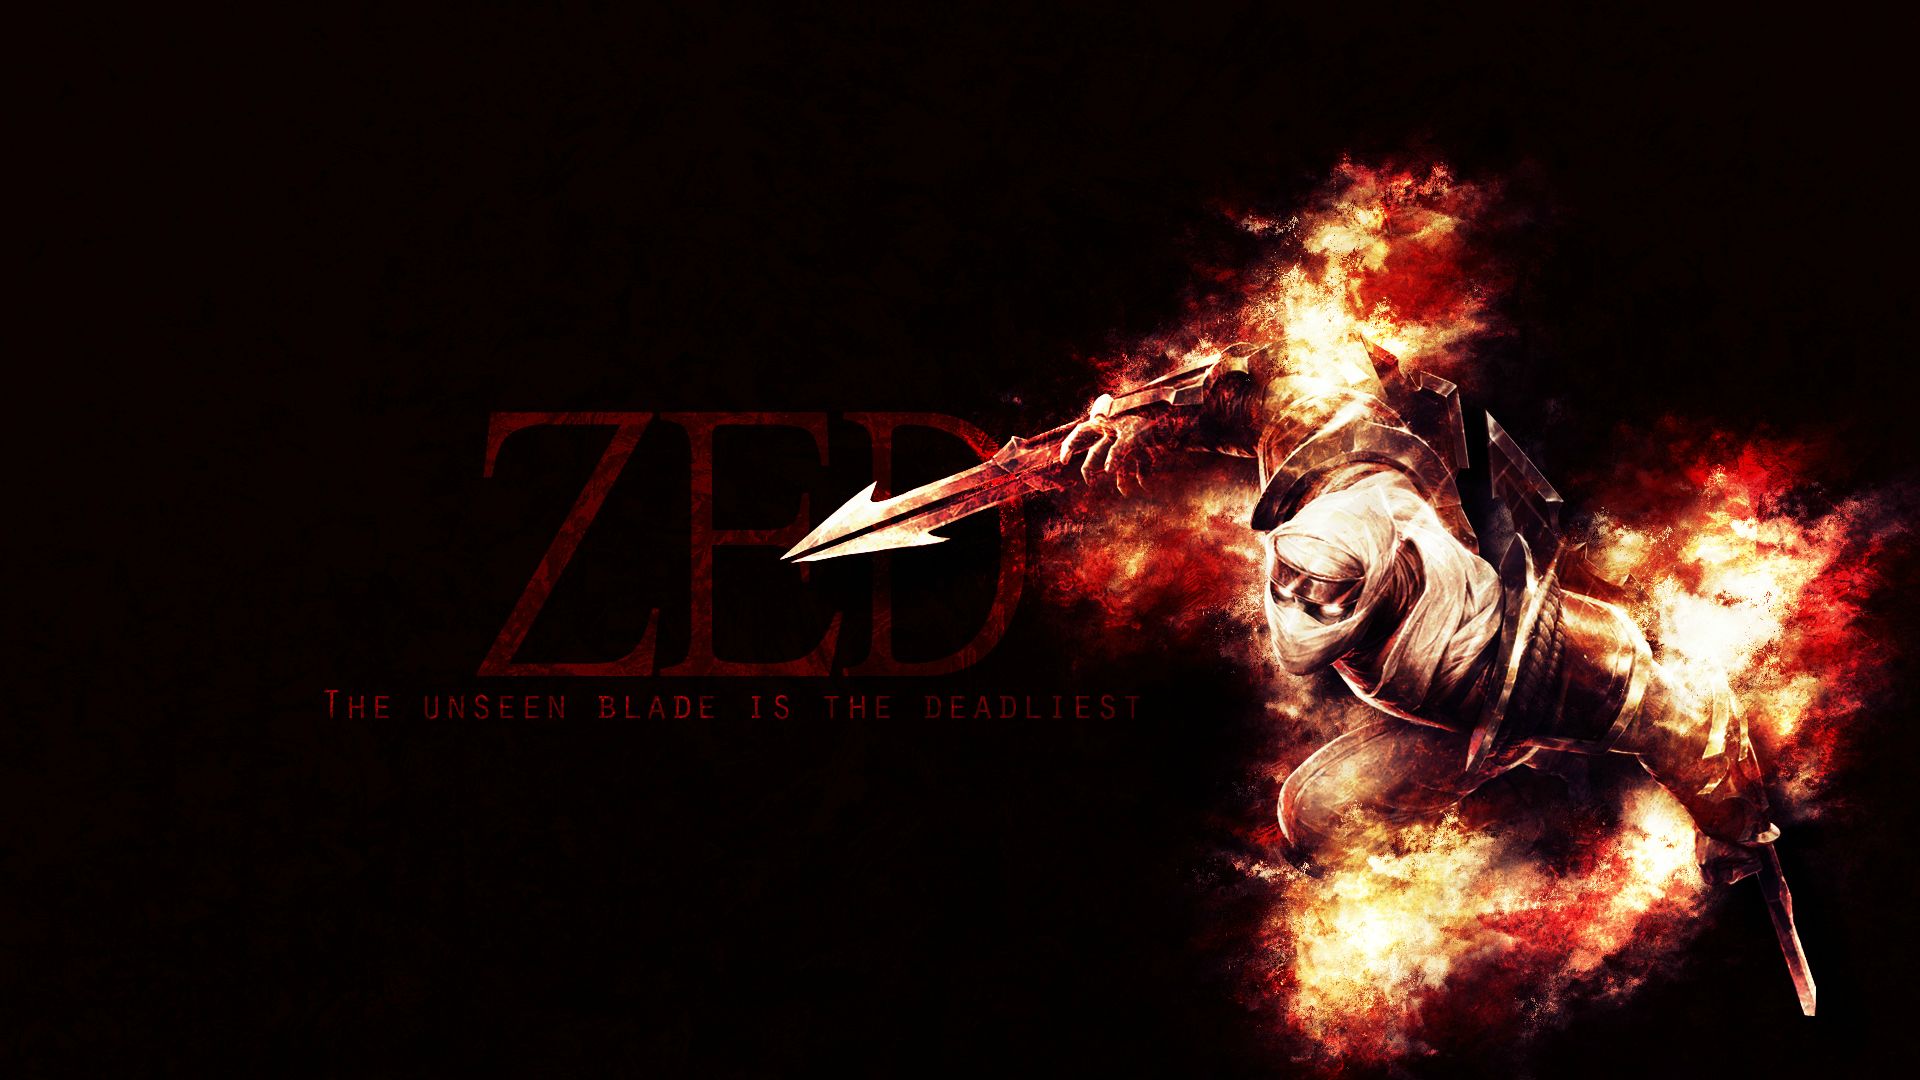 Zed Phone Wallpapers - Top Free Zed Phone Backgrounds